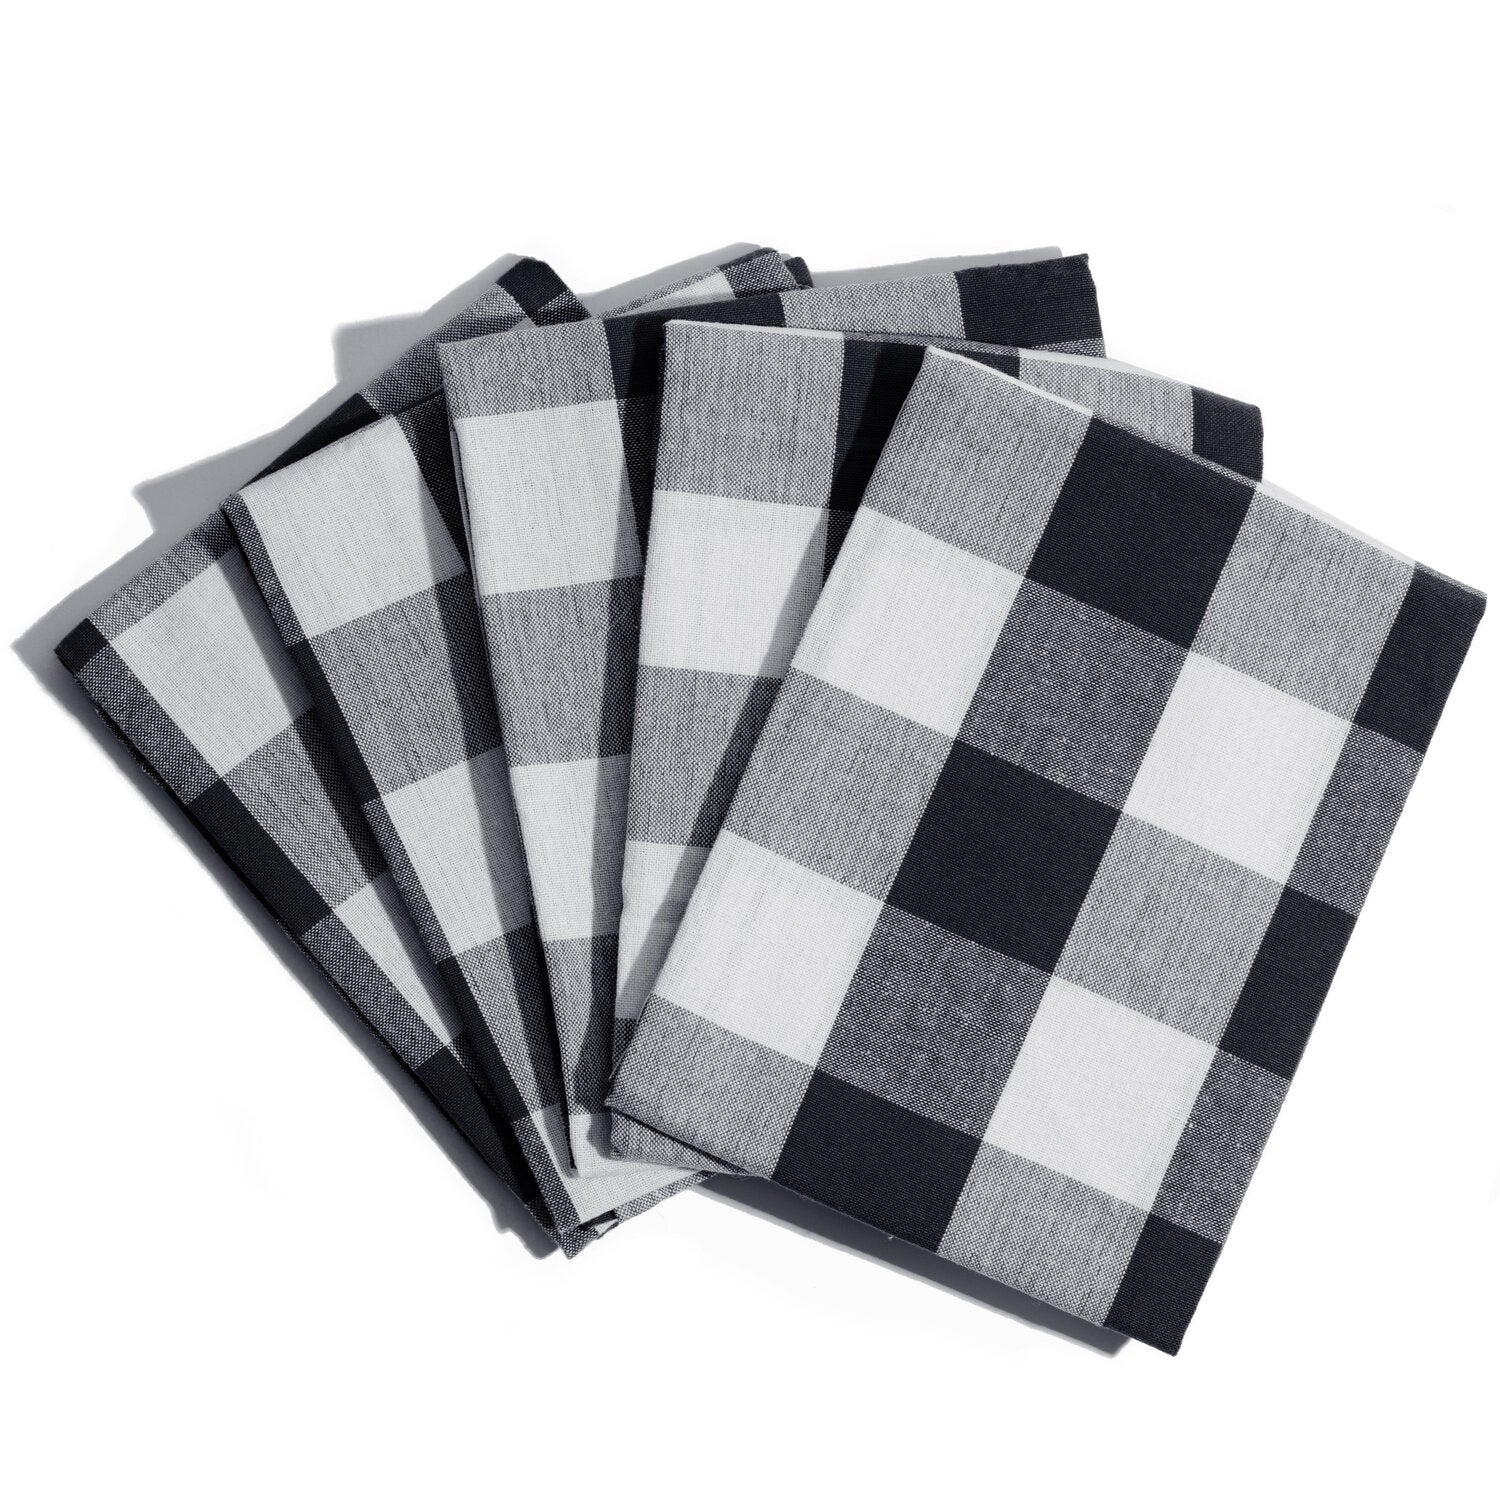 All Cotton and Linen Kitchen Towels, Dish Towels, Checkered Tea Towels Gray/White 18 inch x 28 inch Pack 6, Size: 18 x 28